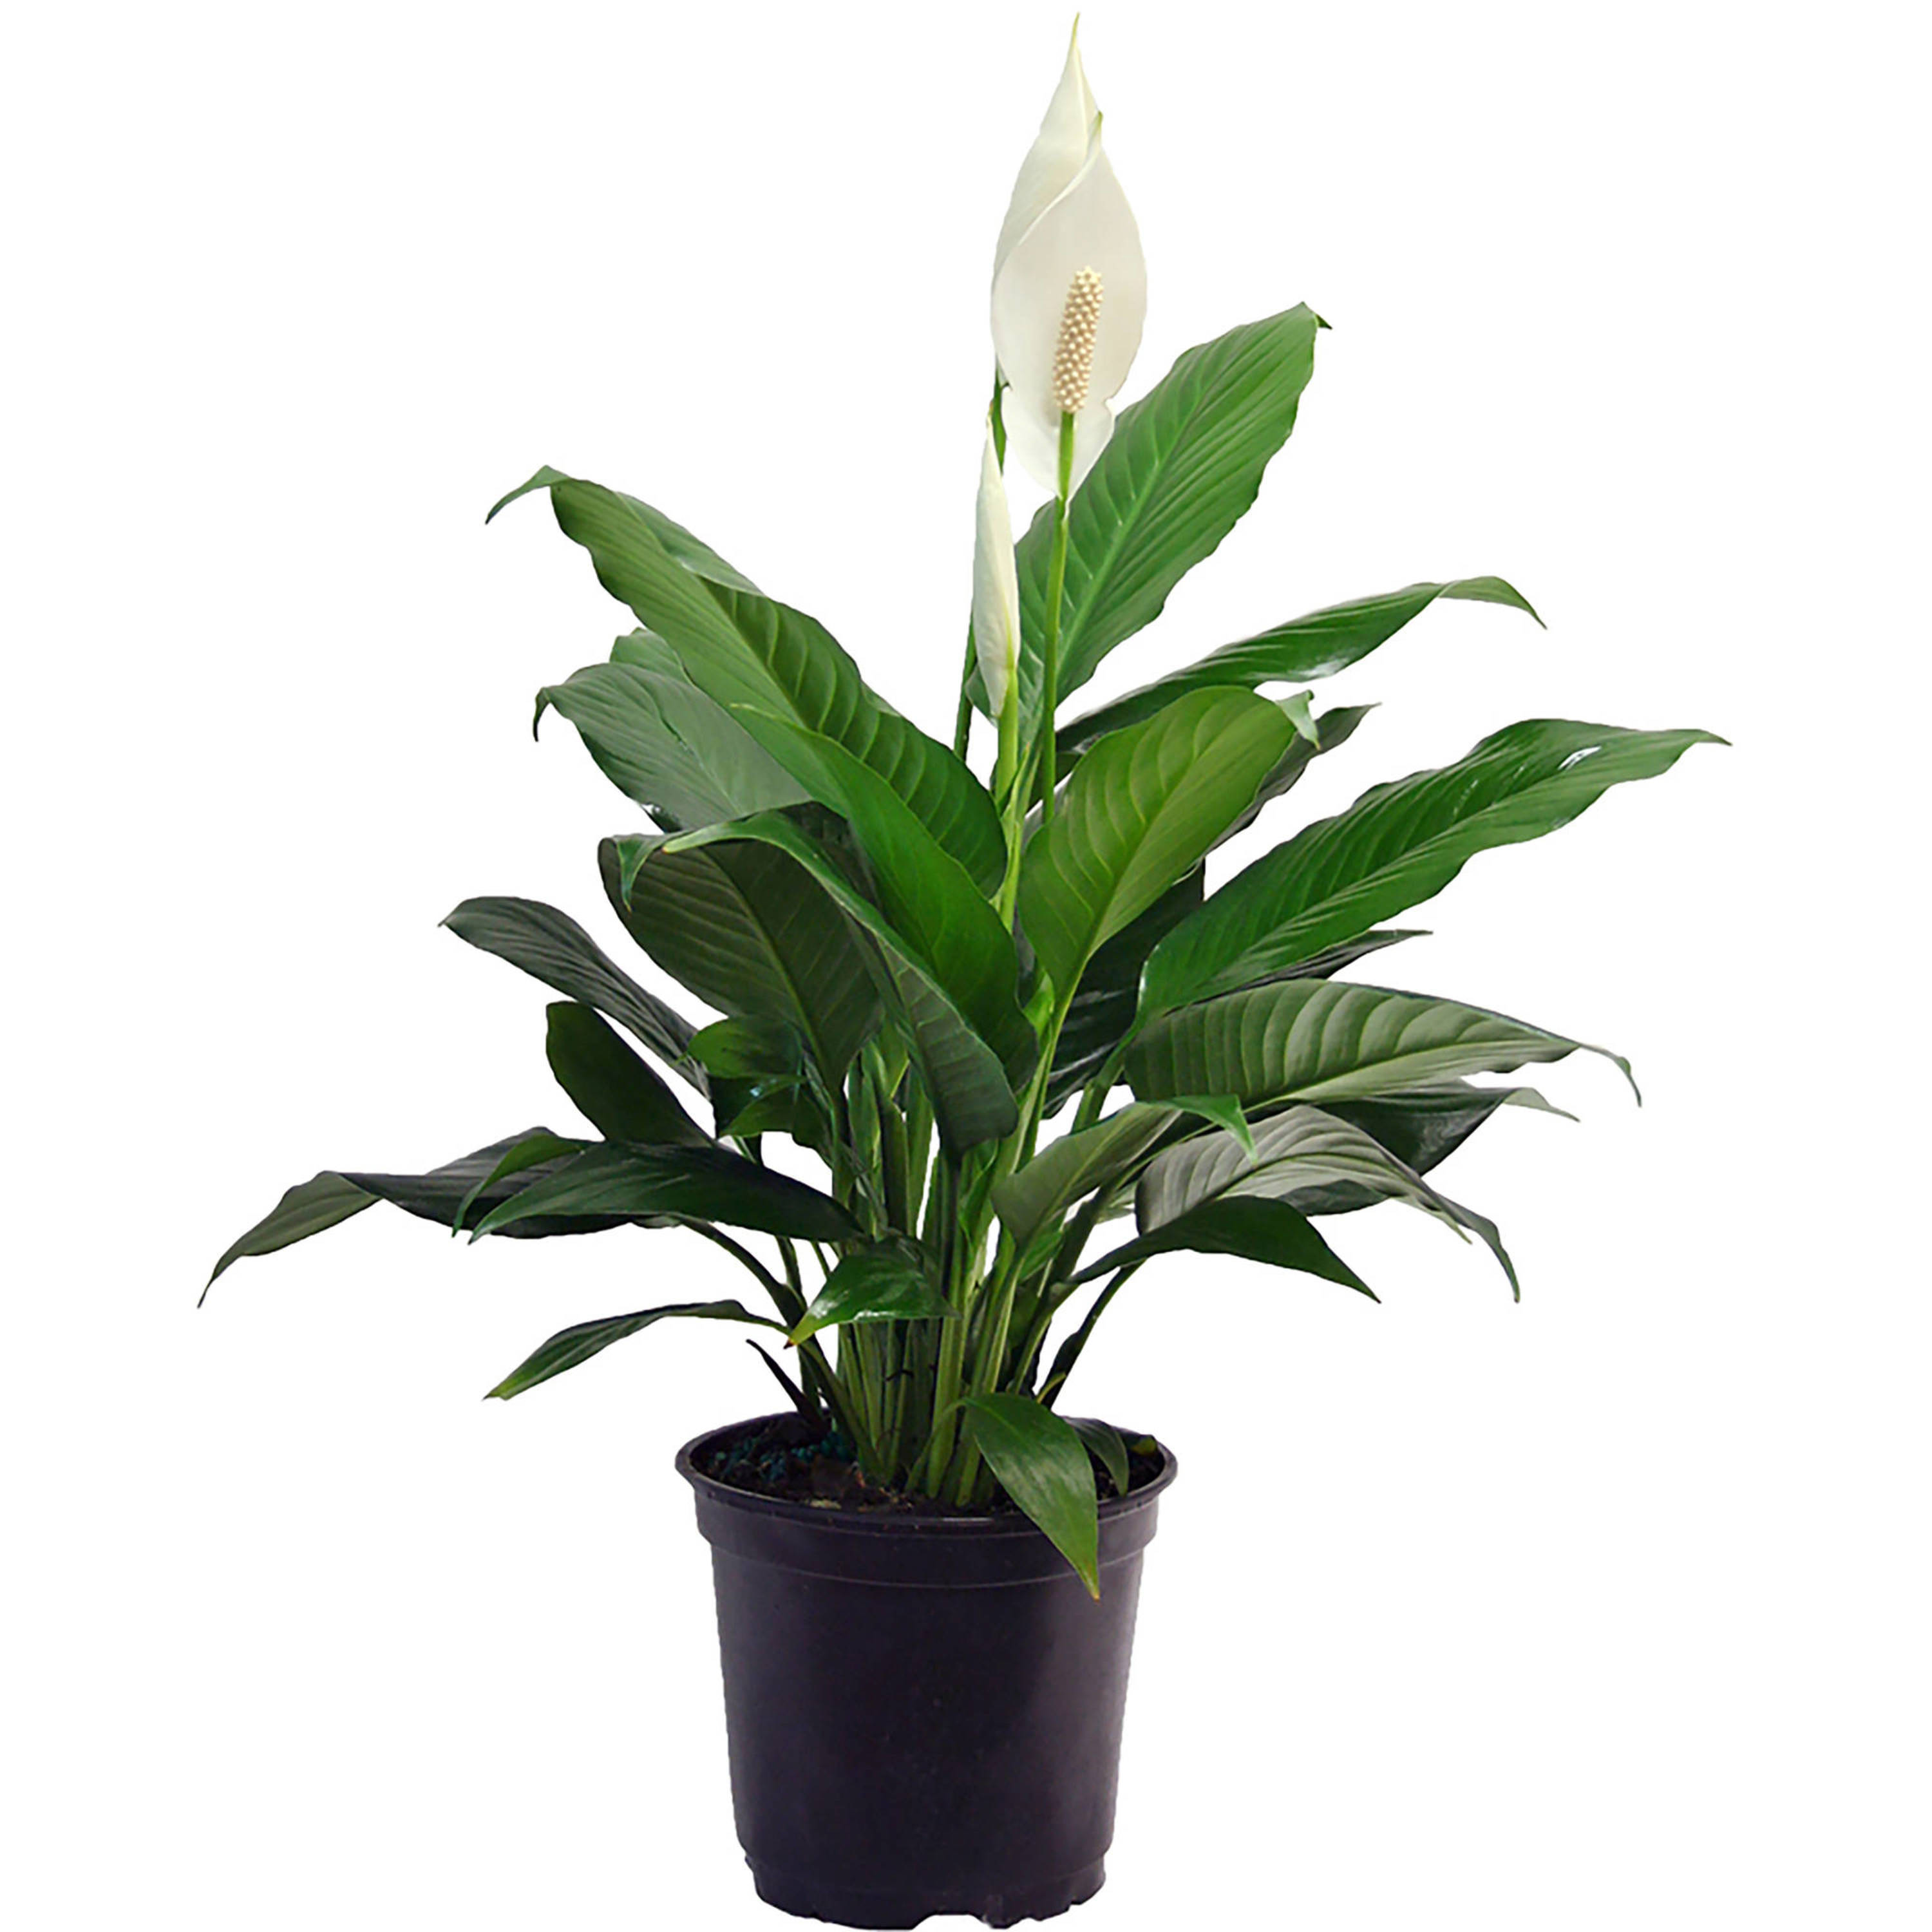 Costa Farms Live Indoor 15in. Tall White Peace Lily; Indirect Sunlight Plant in 6in. Grower Pot - image 1 of 10